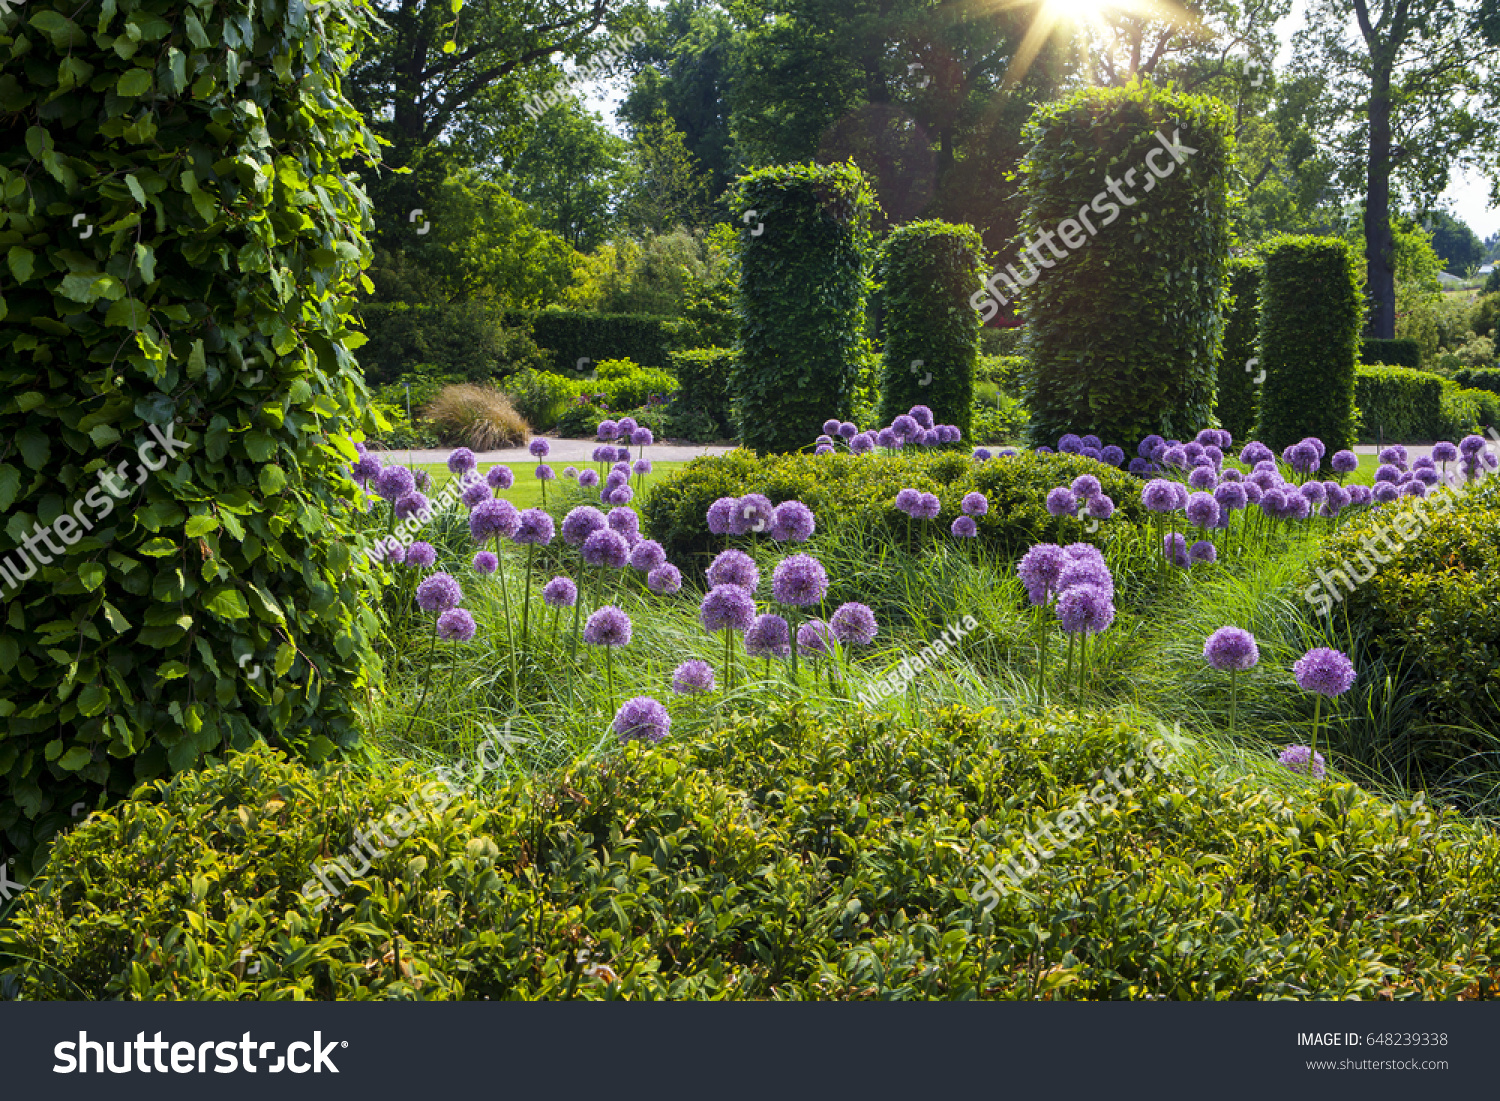 English garden with blooming alliums #648239338